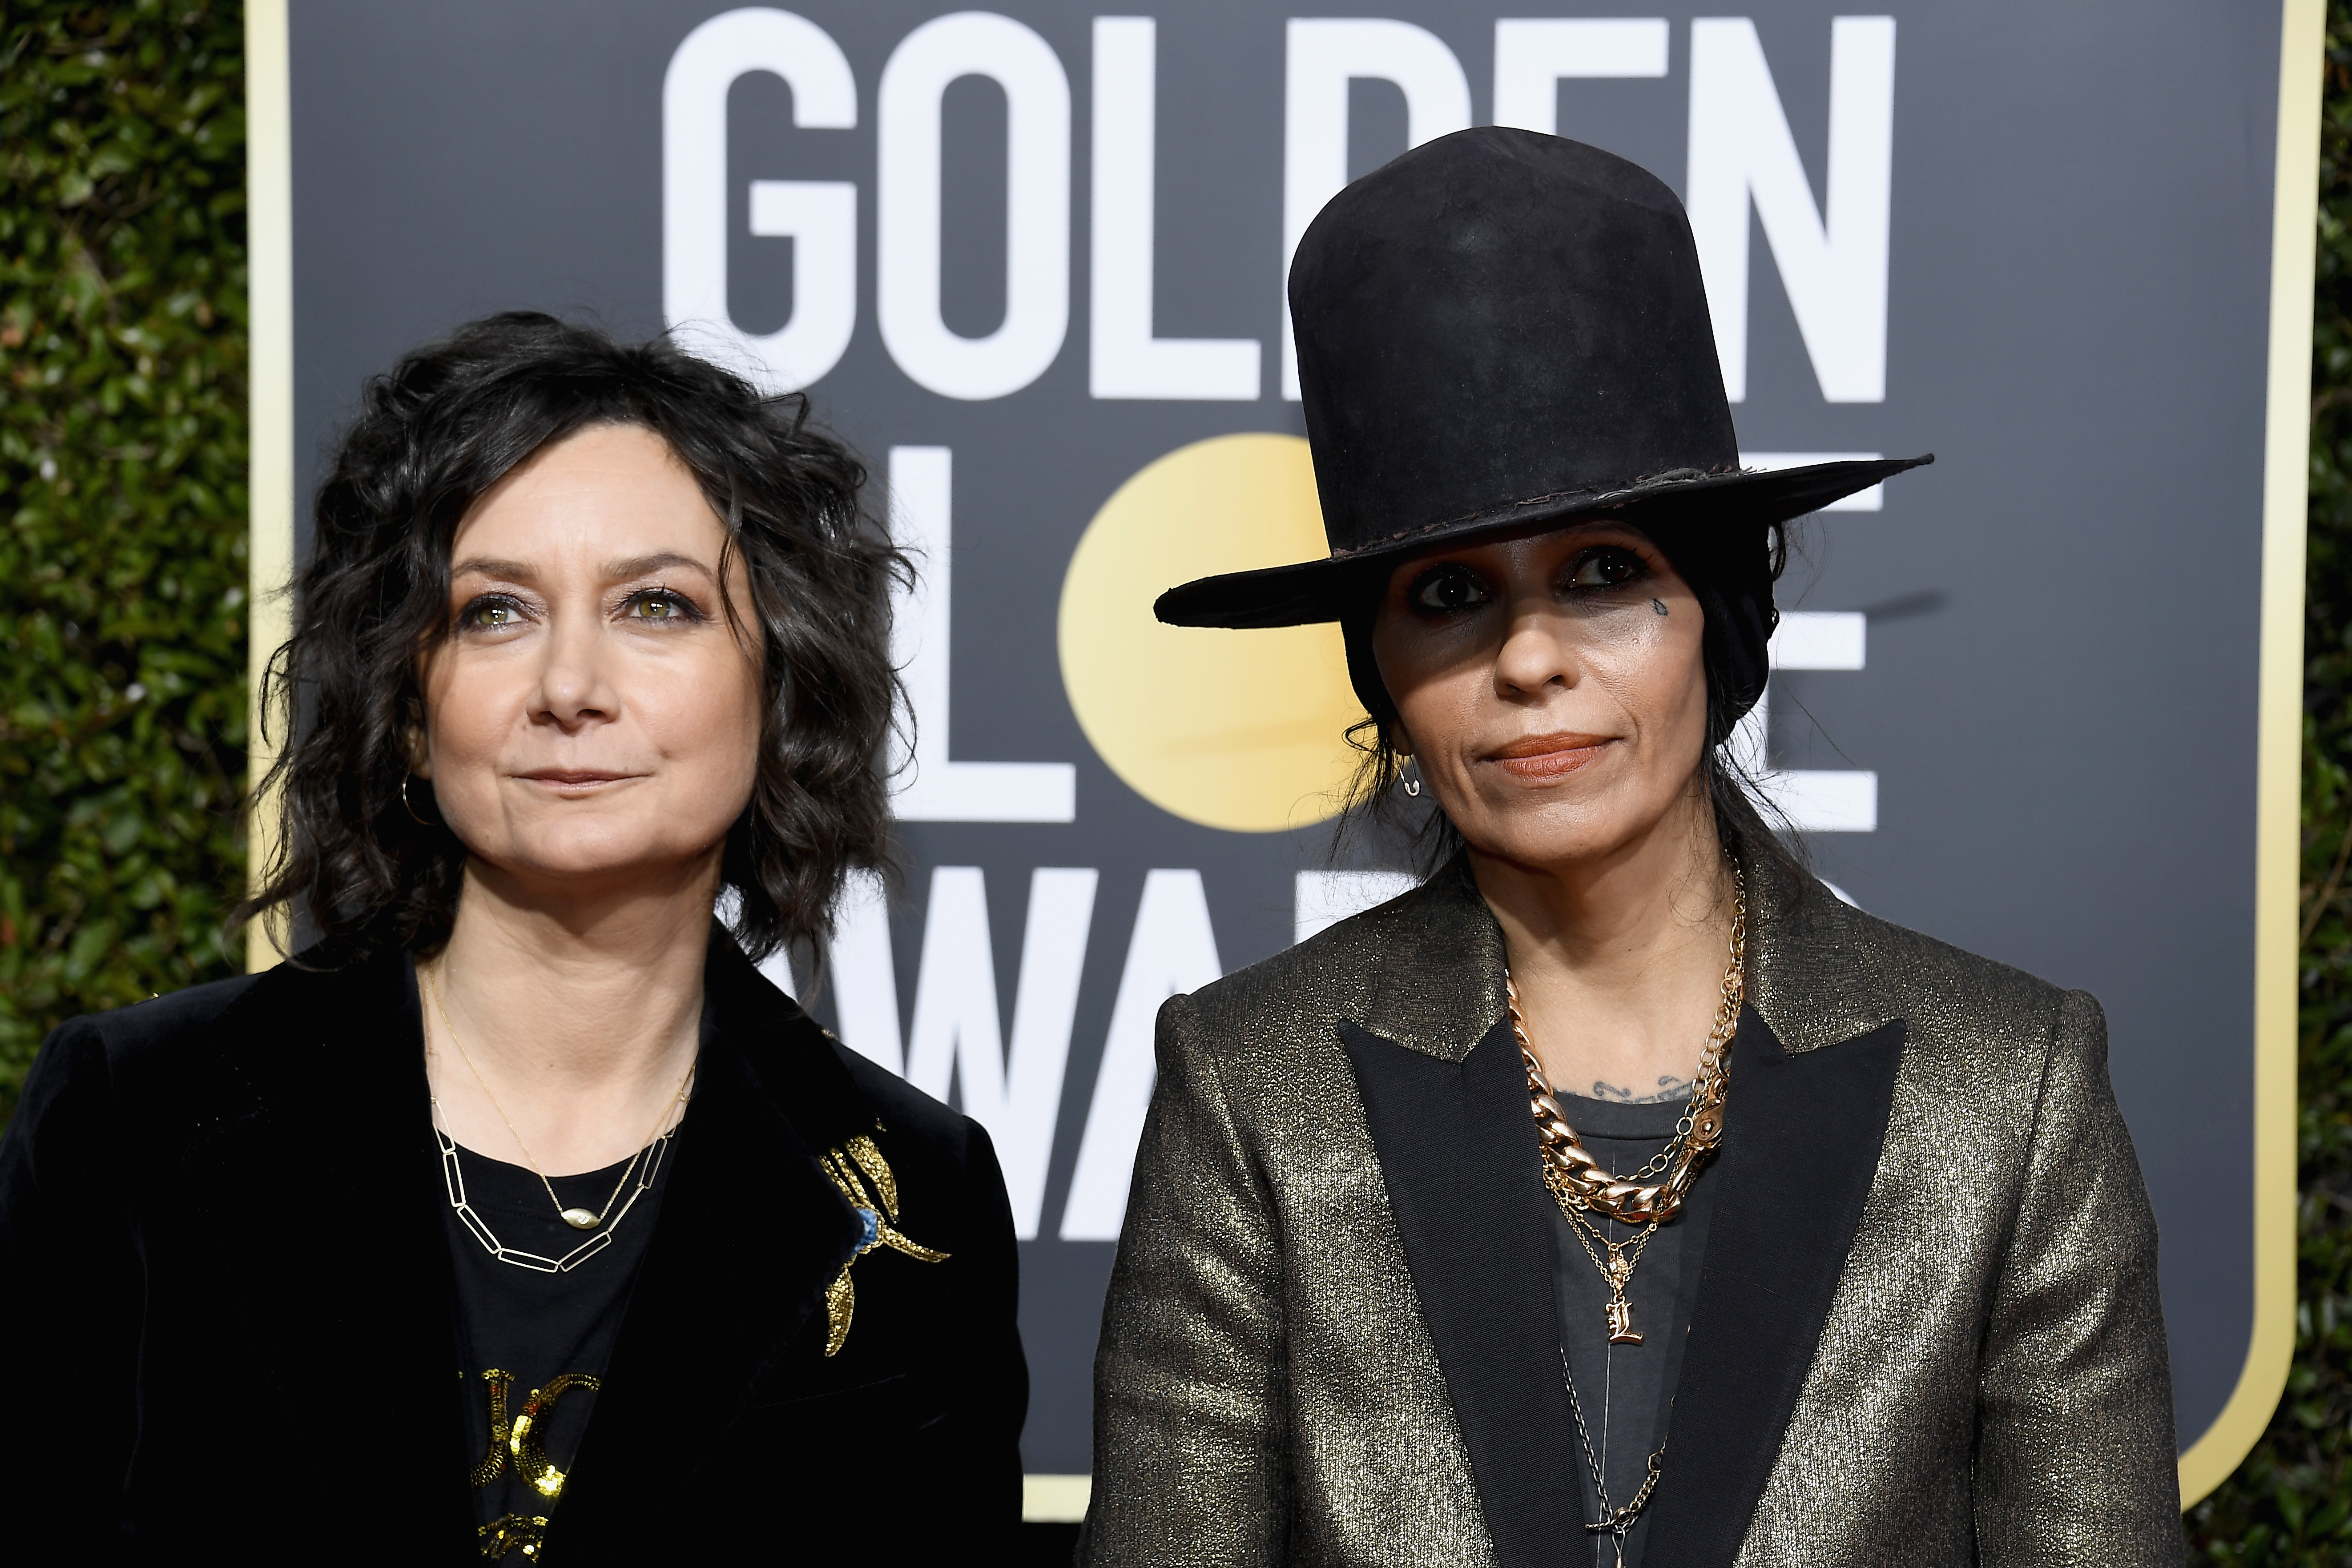 Sara Gilbert and Linda Perry at the 76th Annual Golden Globe Awards in Beverly Hills, California on January 6, 2019 | Source: Getty Images